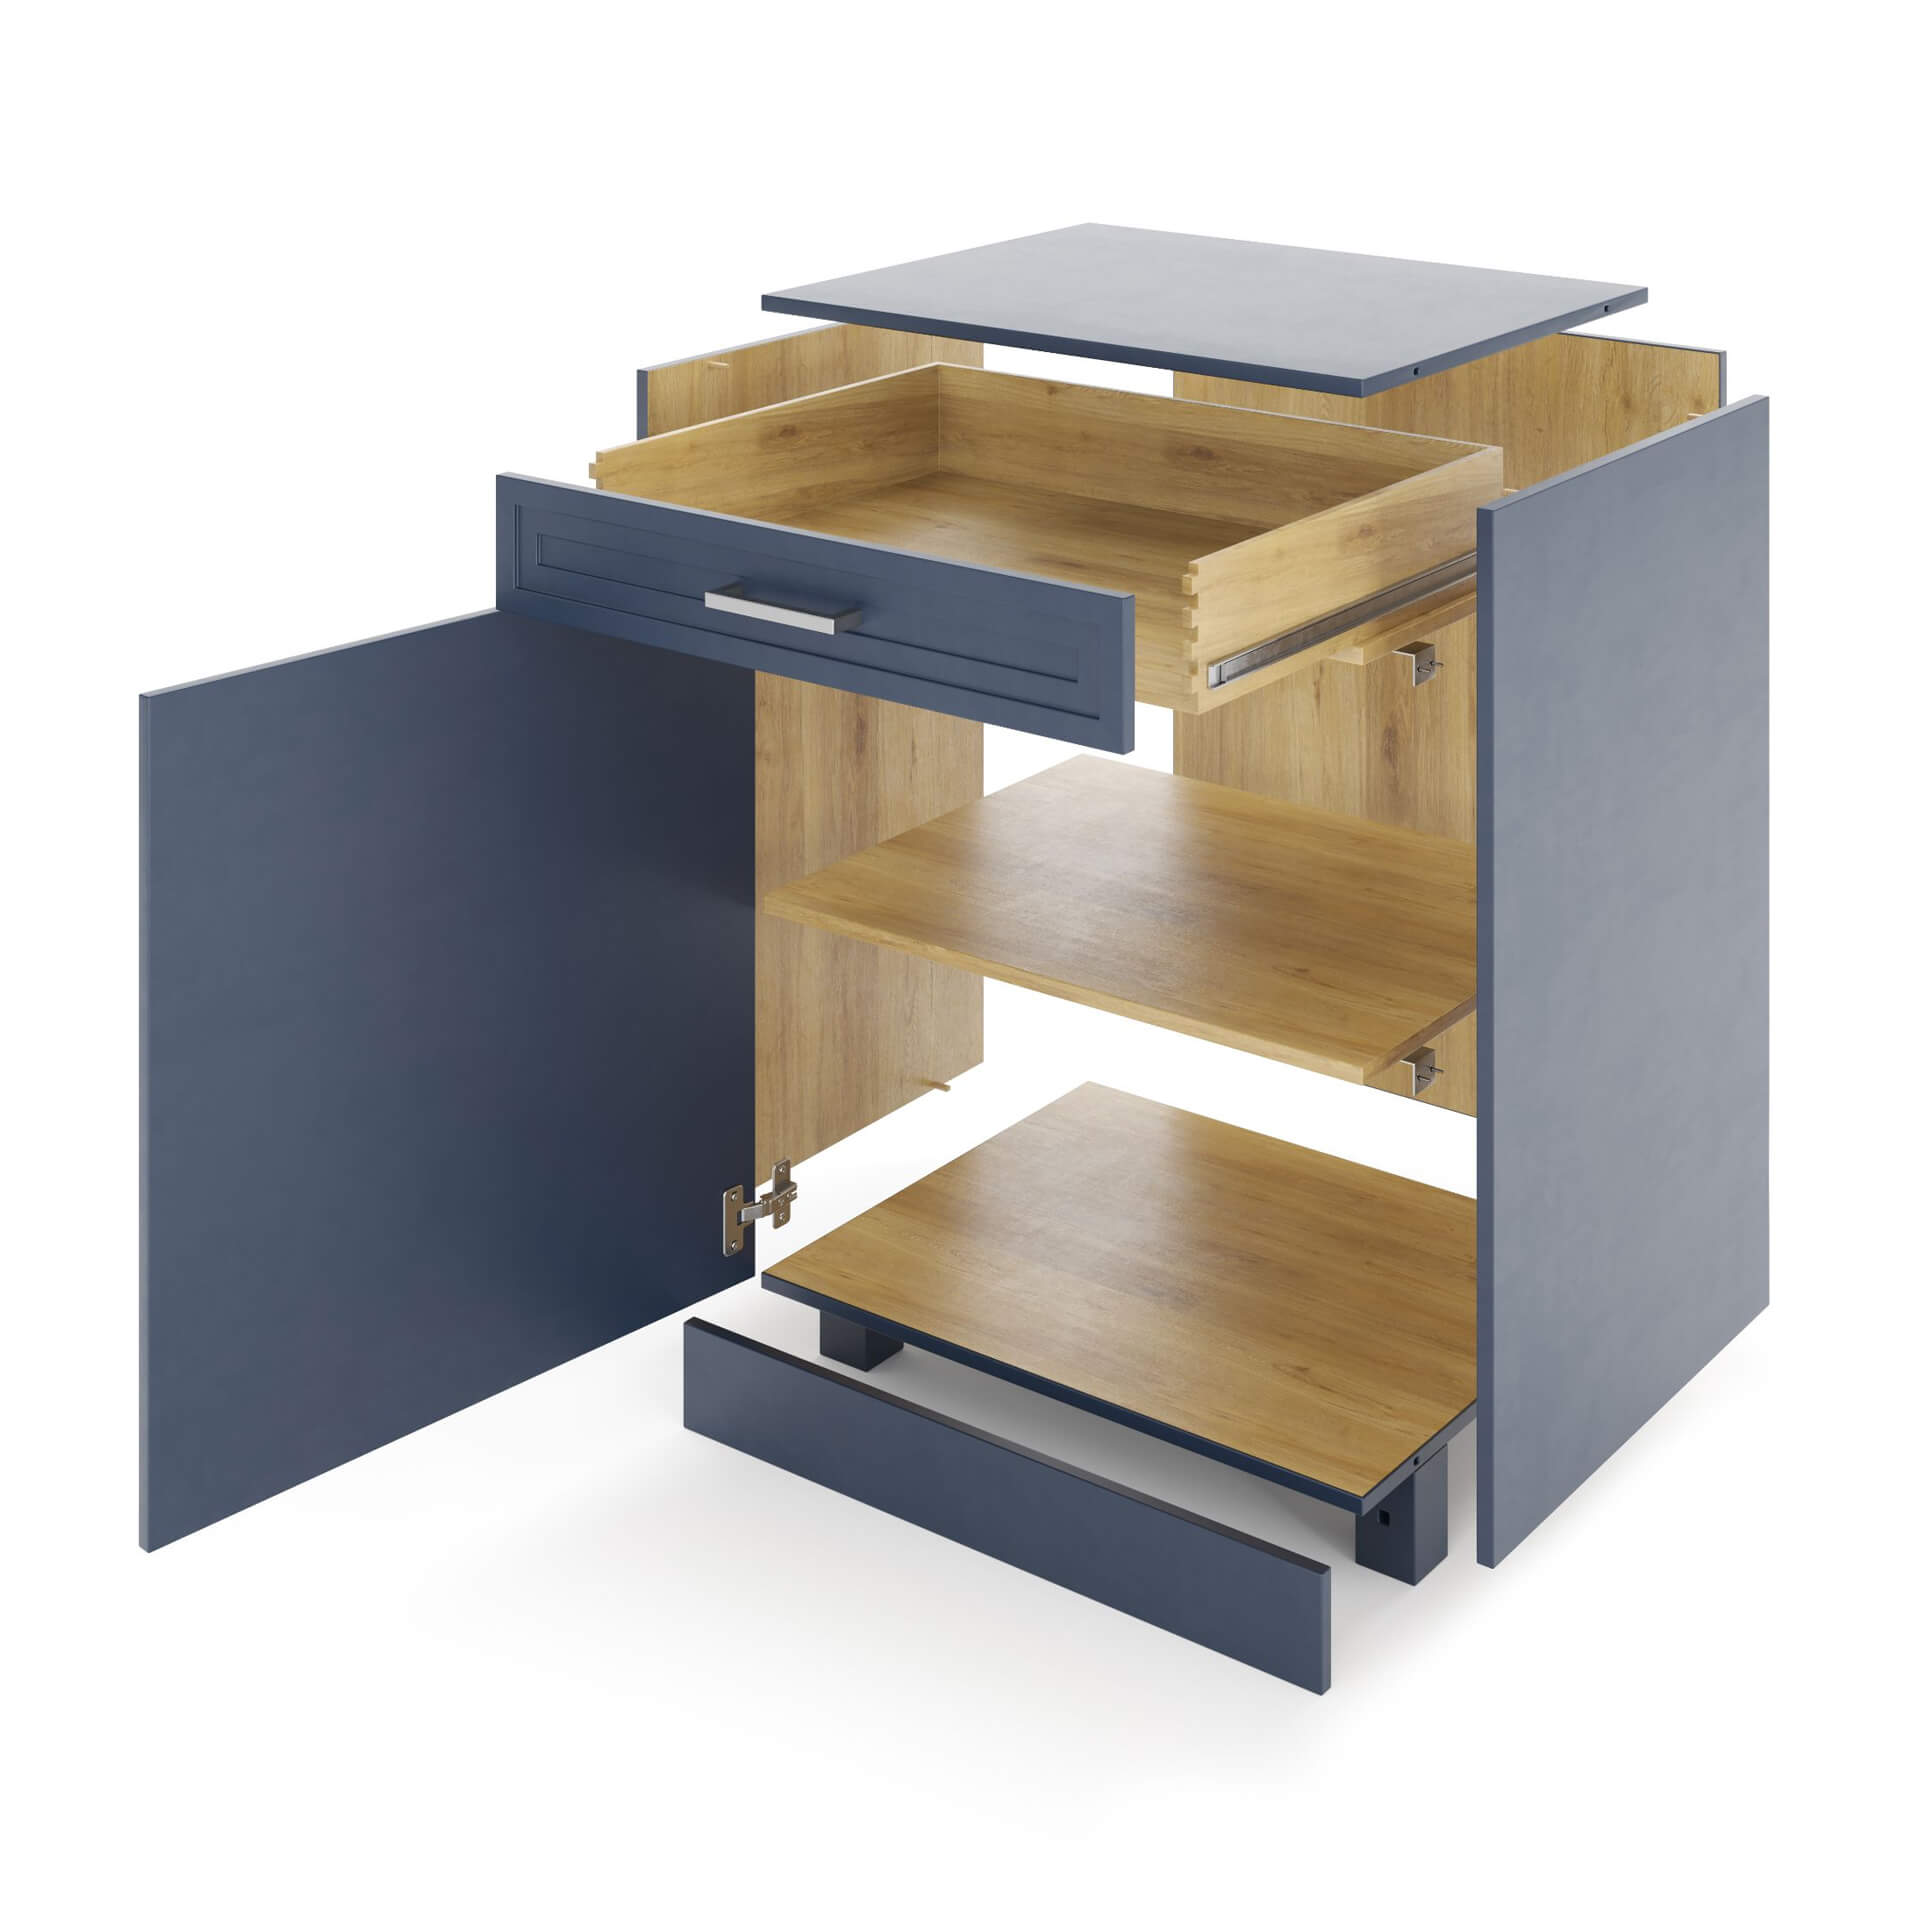 3D Visualization of Cabinet Usage